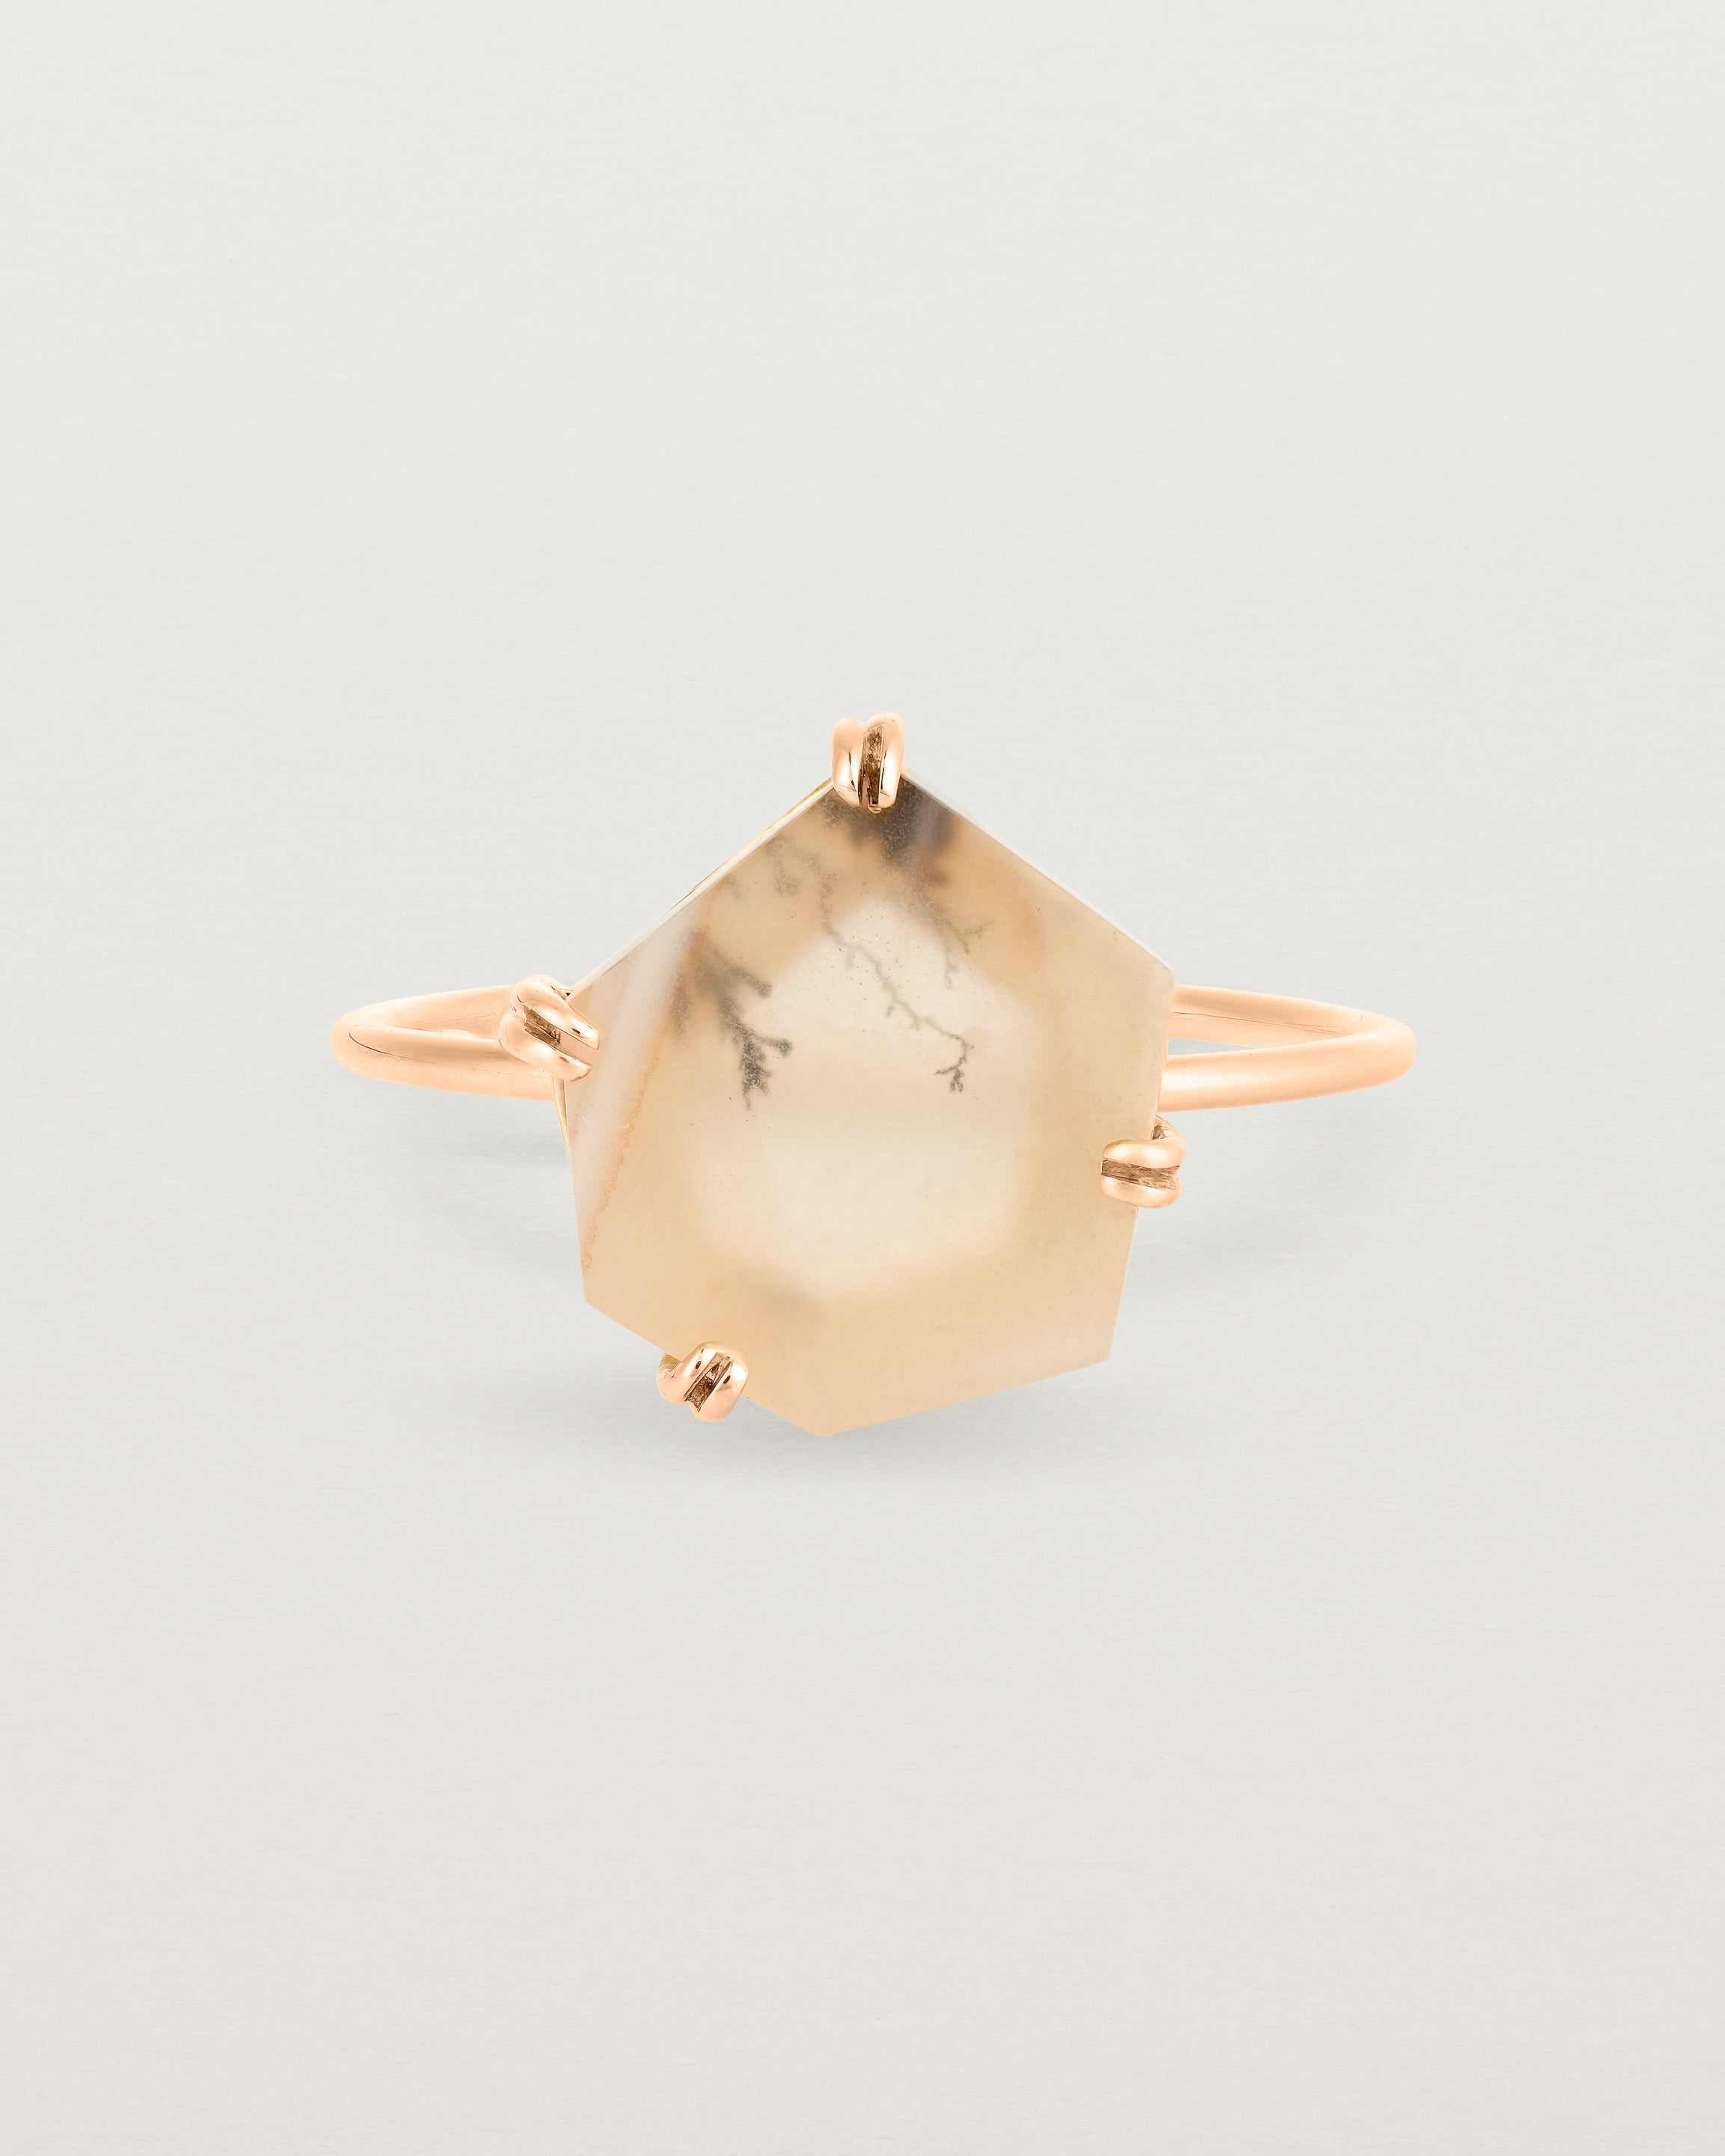 Agate stone ring in rose gold